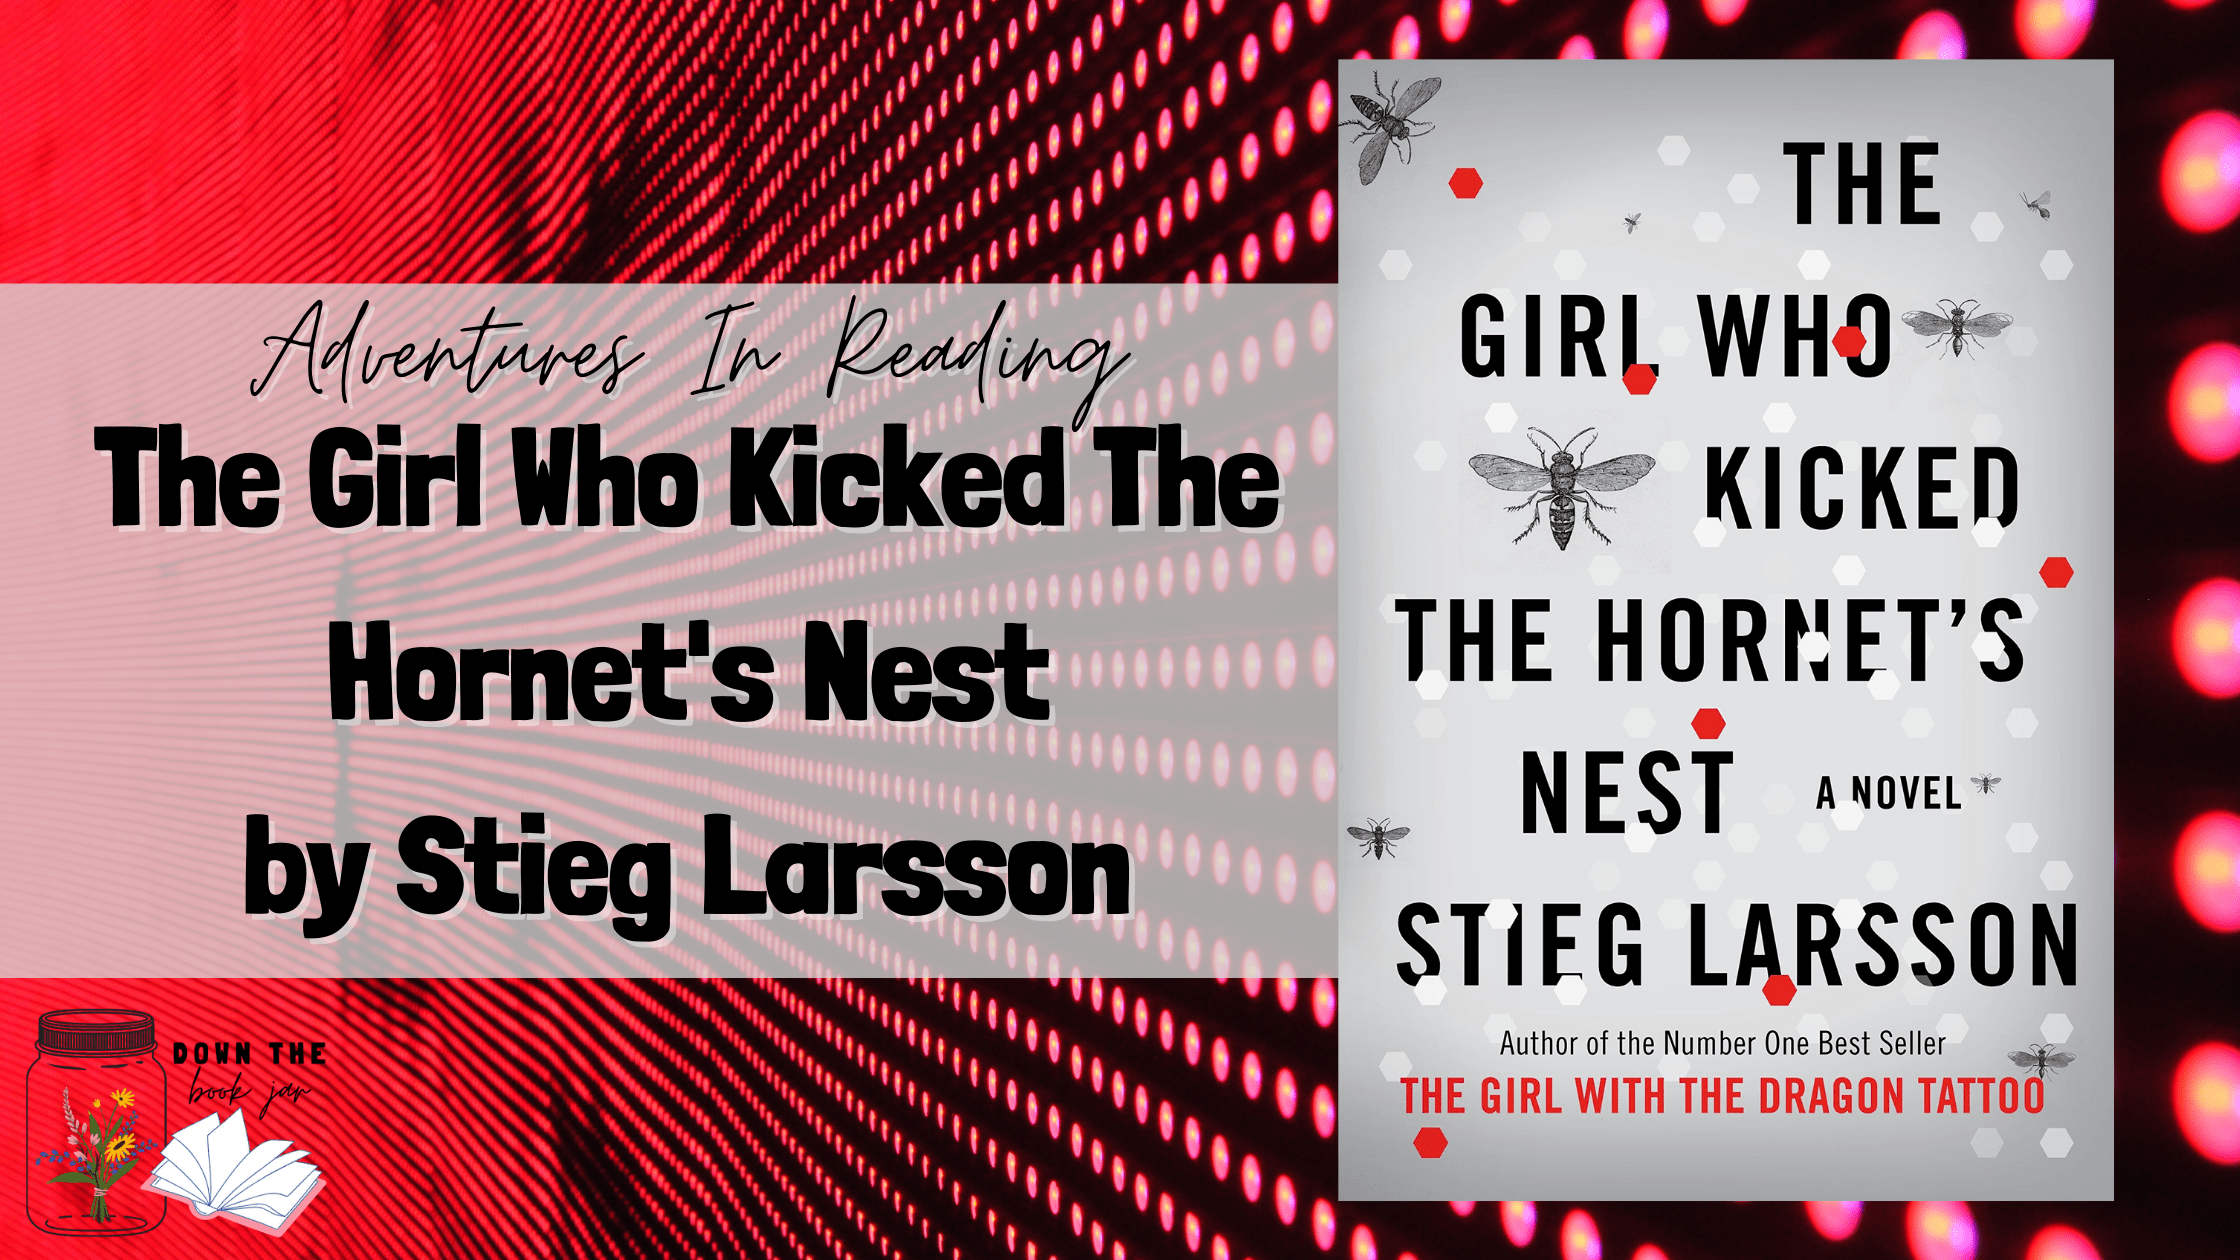 The Girl Who Kicked The Hornet’s Nest by Stieg Larsson